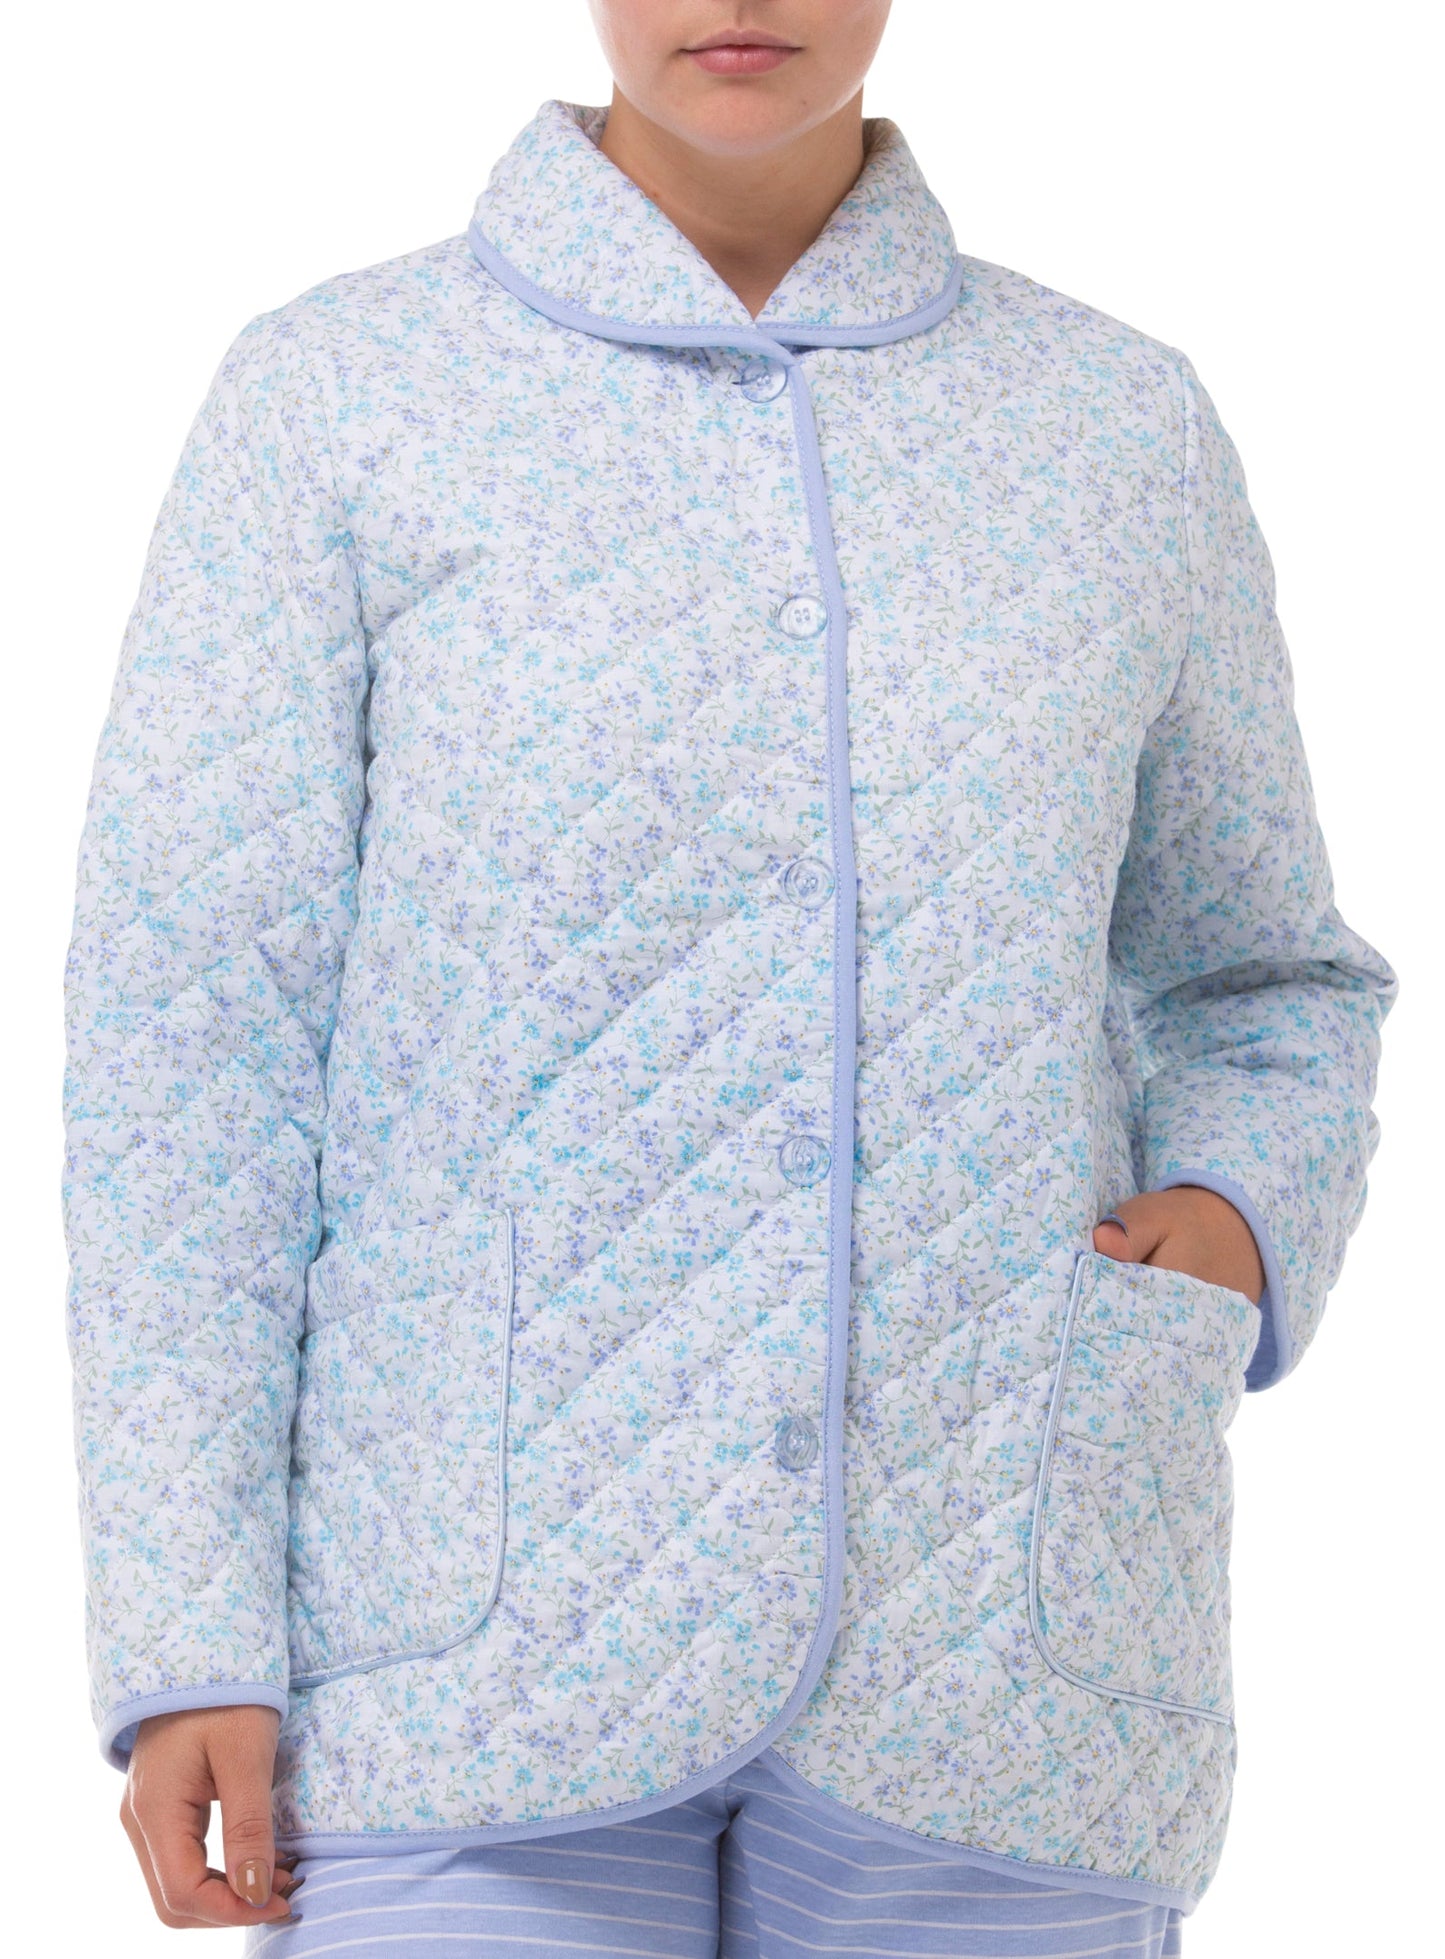 LOLA QUILTED BED JACKET BLUE - SK401